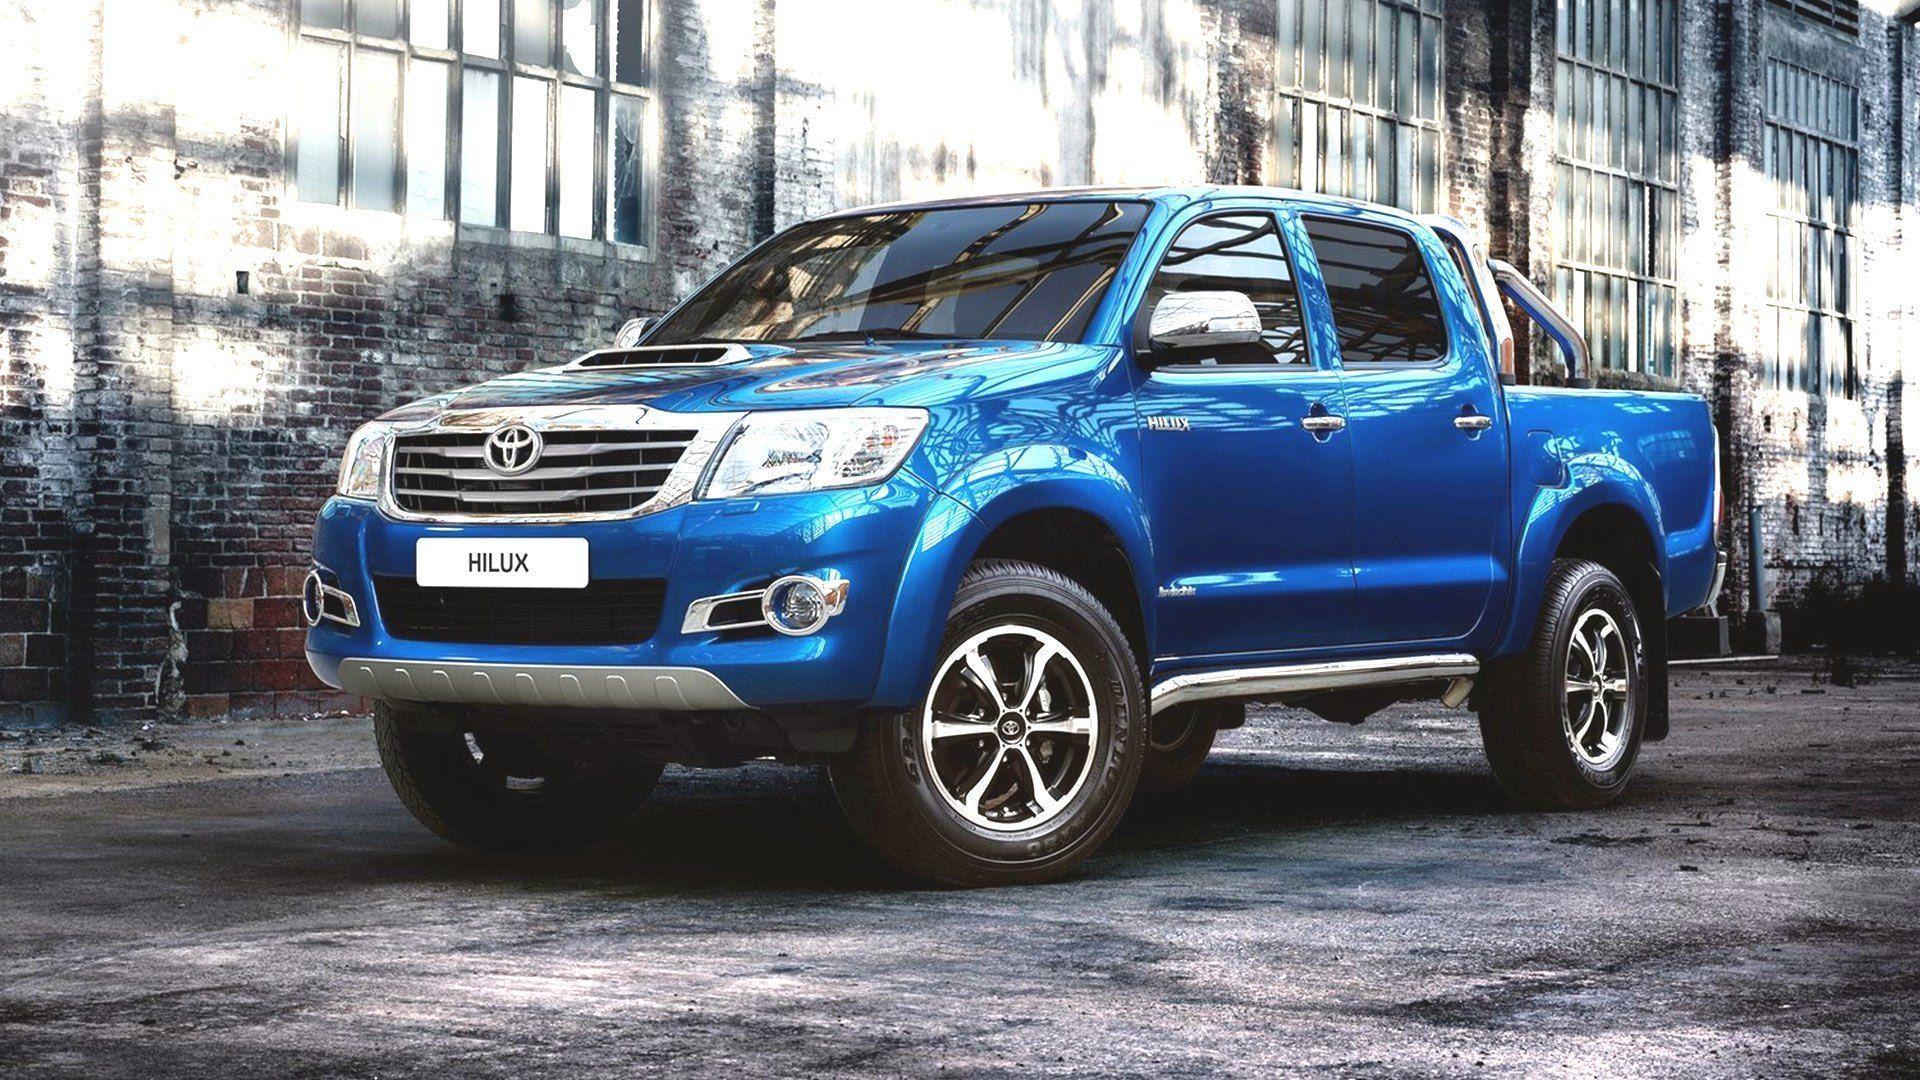 Toyota Hilux Invincible Specs and Review. Review Cars 2015